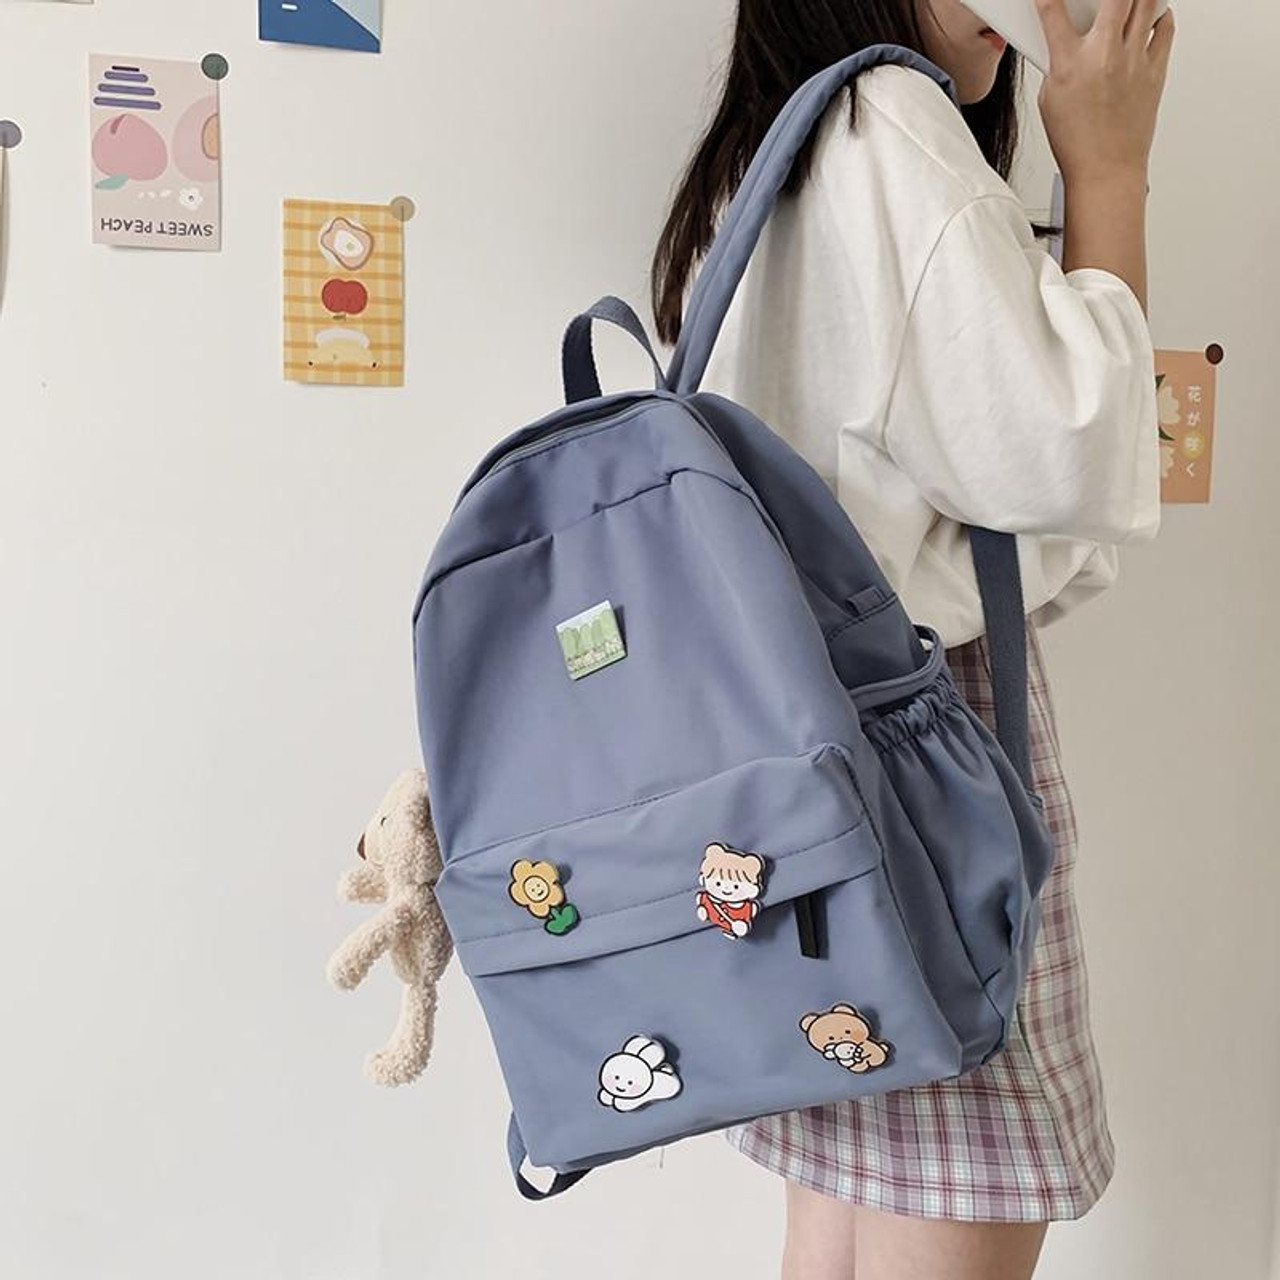 AESTHETIC SOLID COLOR CUTE BEAR BACKPACK - Cosmique Studio